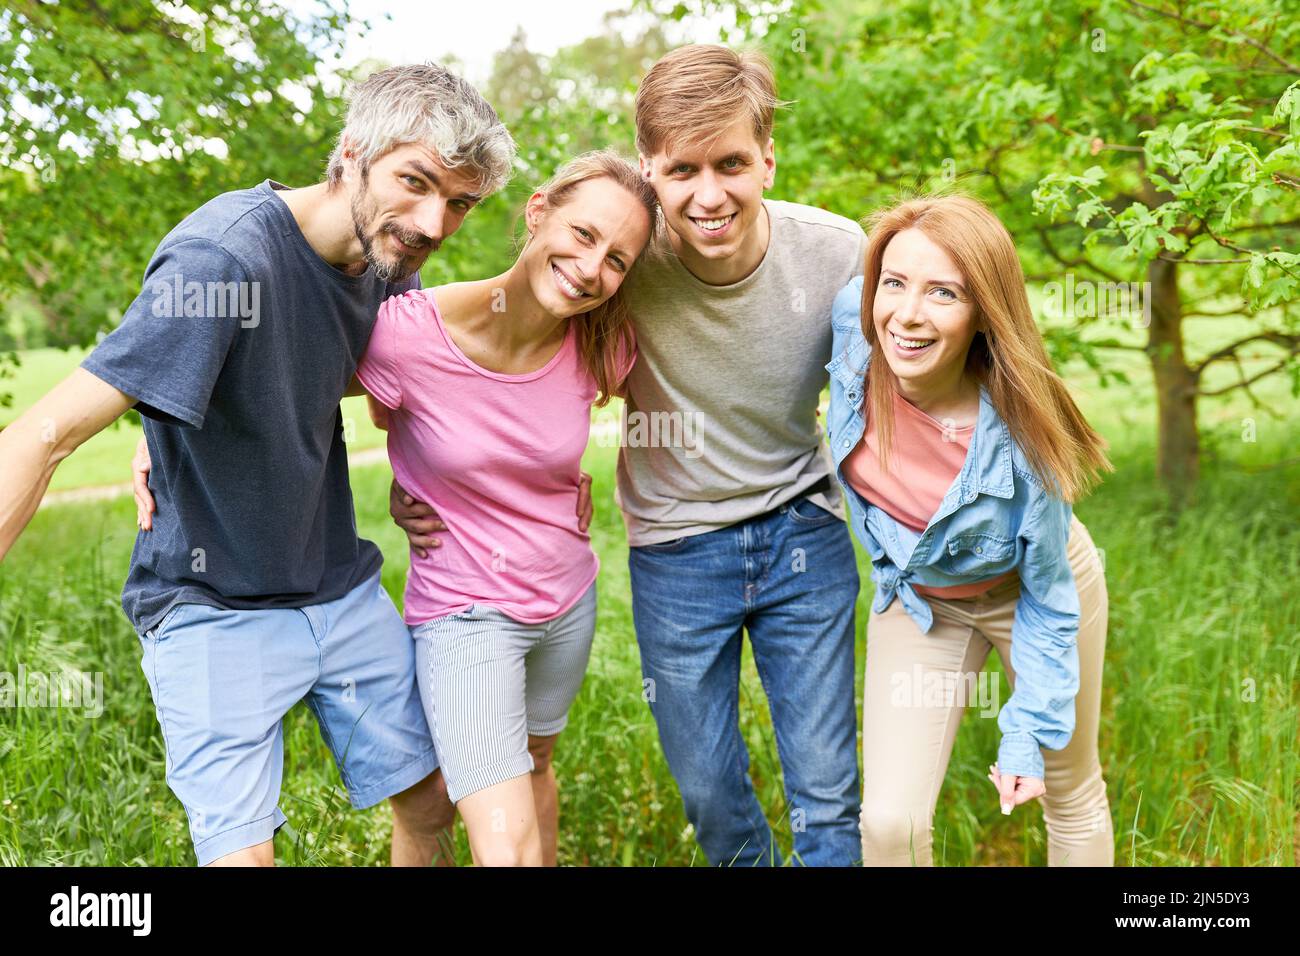 Happy young people as friends or siblings hugging on a summer outing Stock Photo